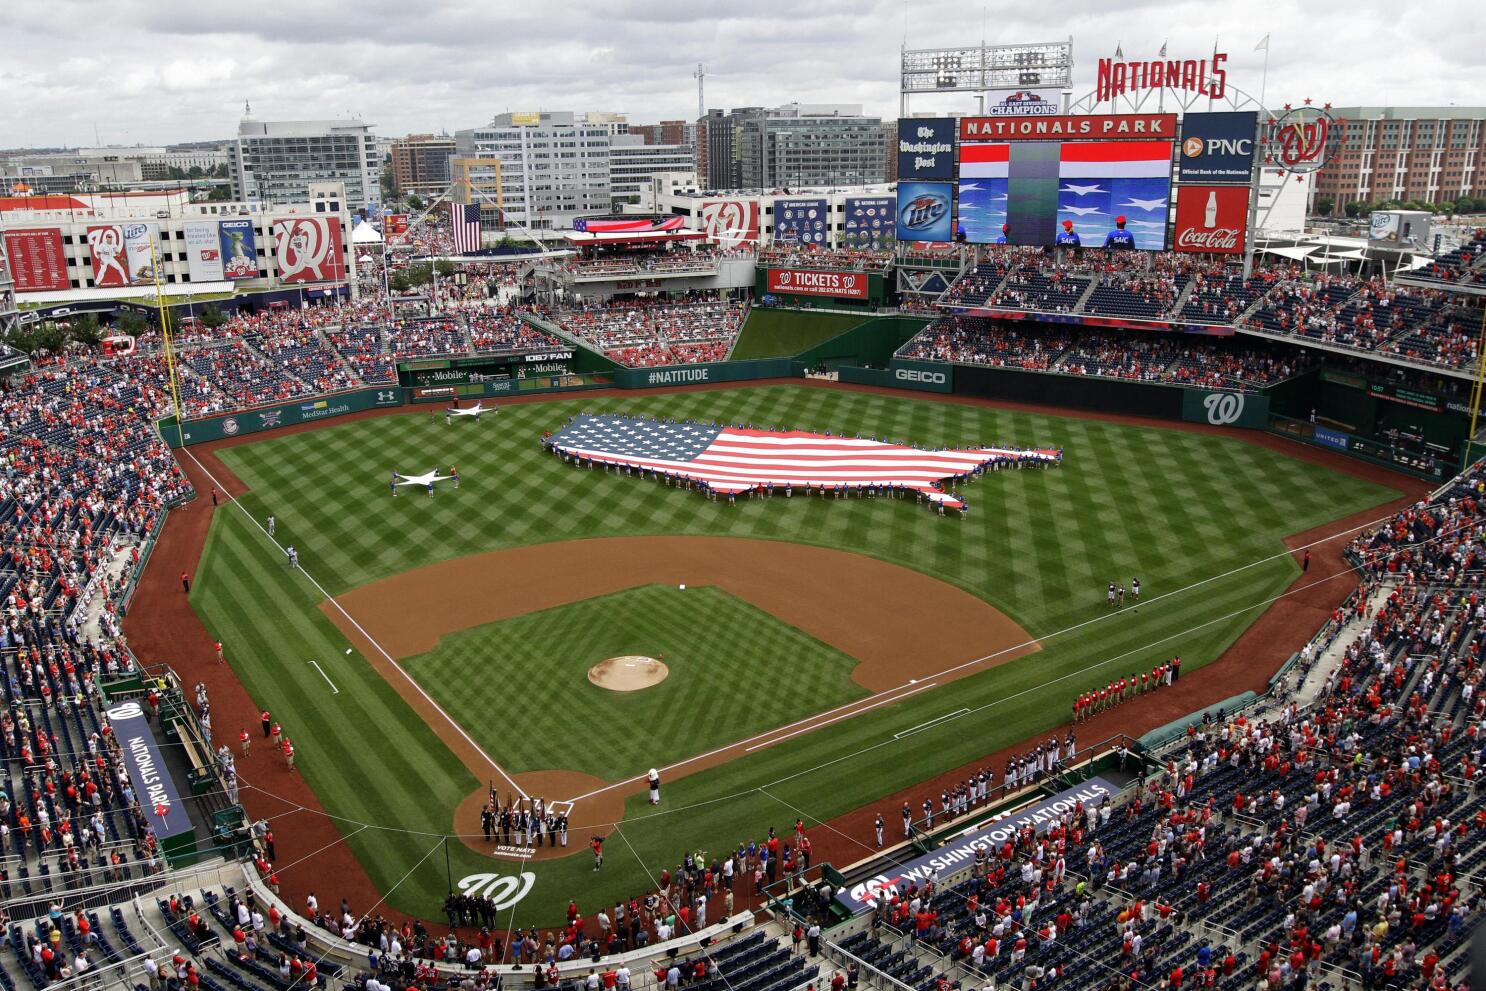 MLB teams should turn stadiums turn stadiums into polling places